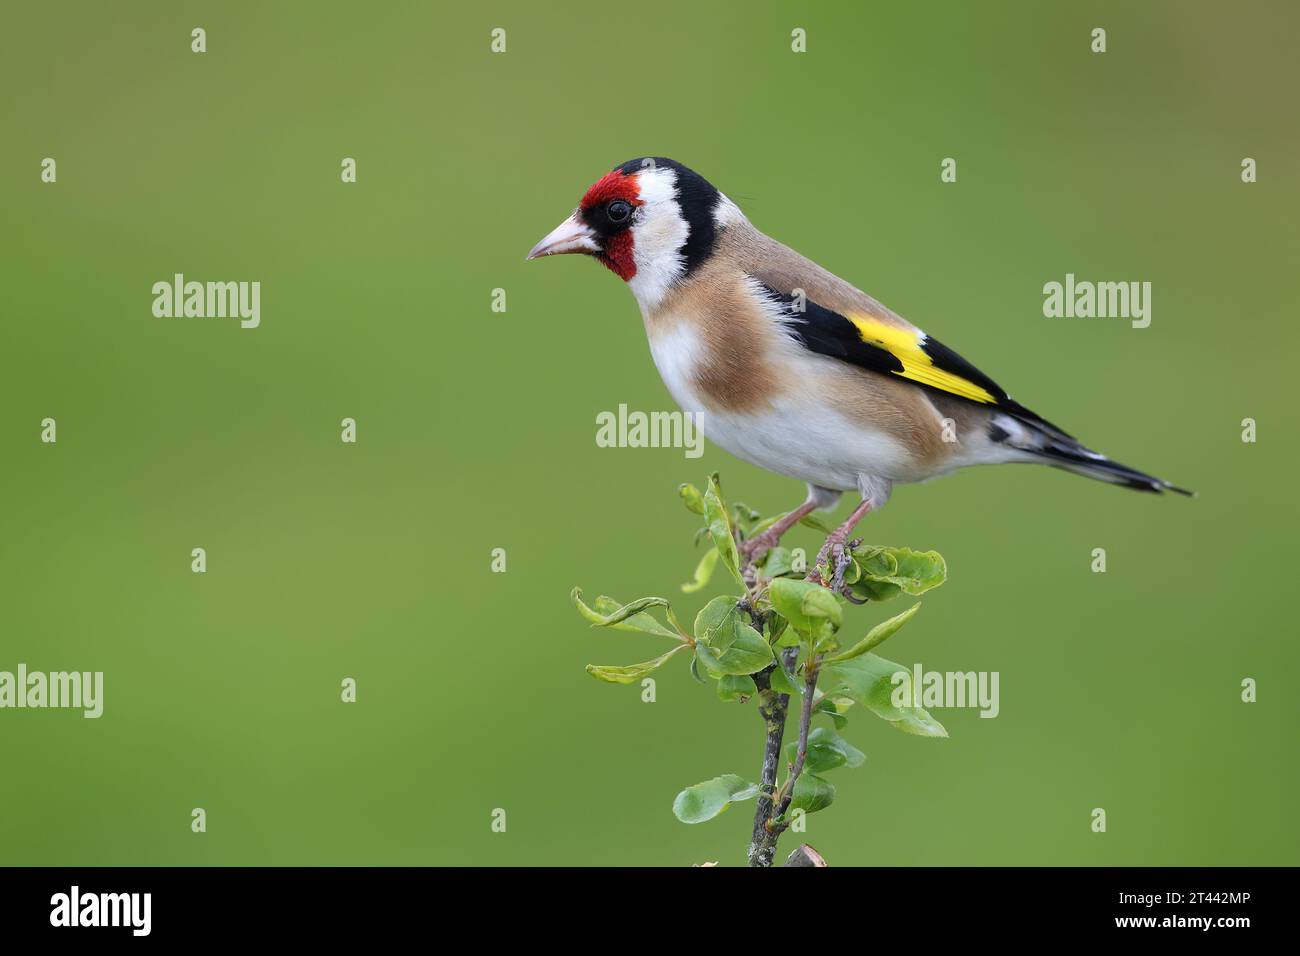 European Goldfinch, Carduelis Carduelis, perched on a branch in spring. Stock Photo